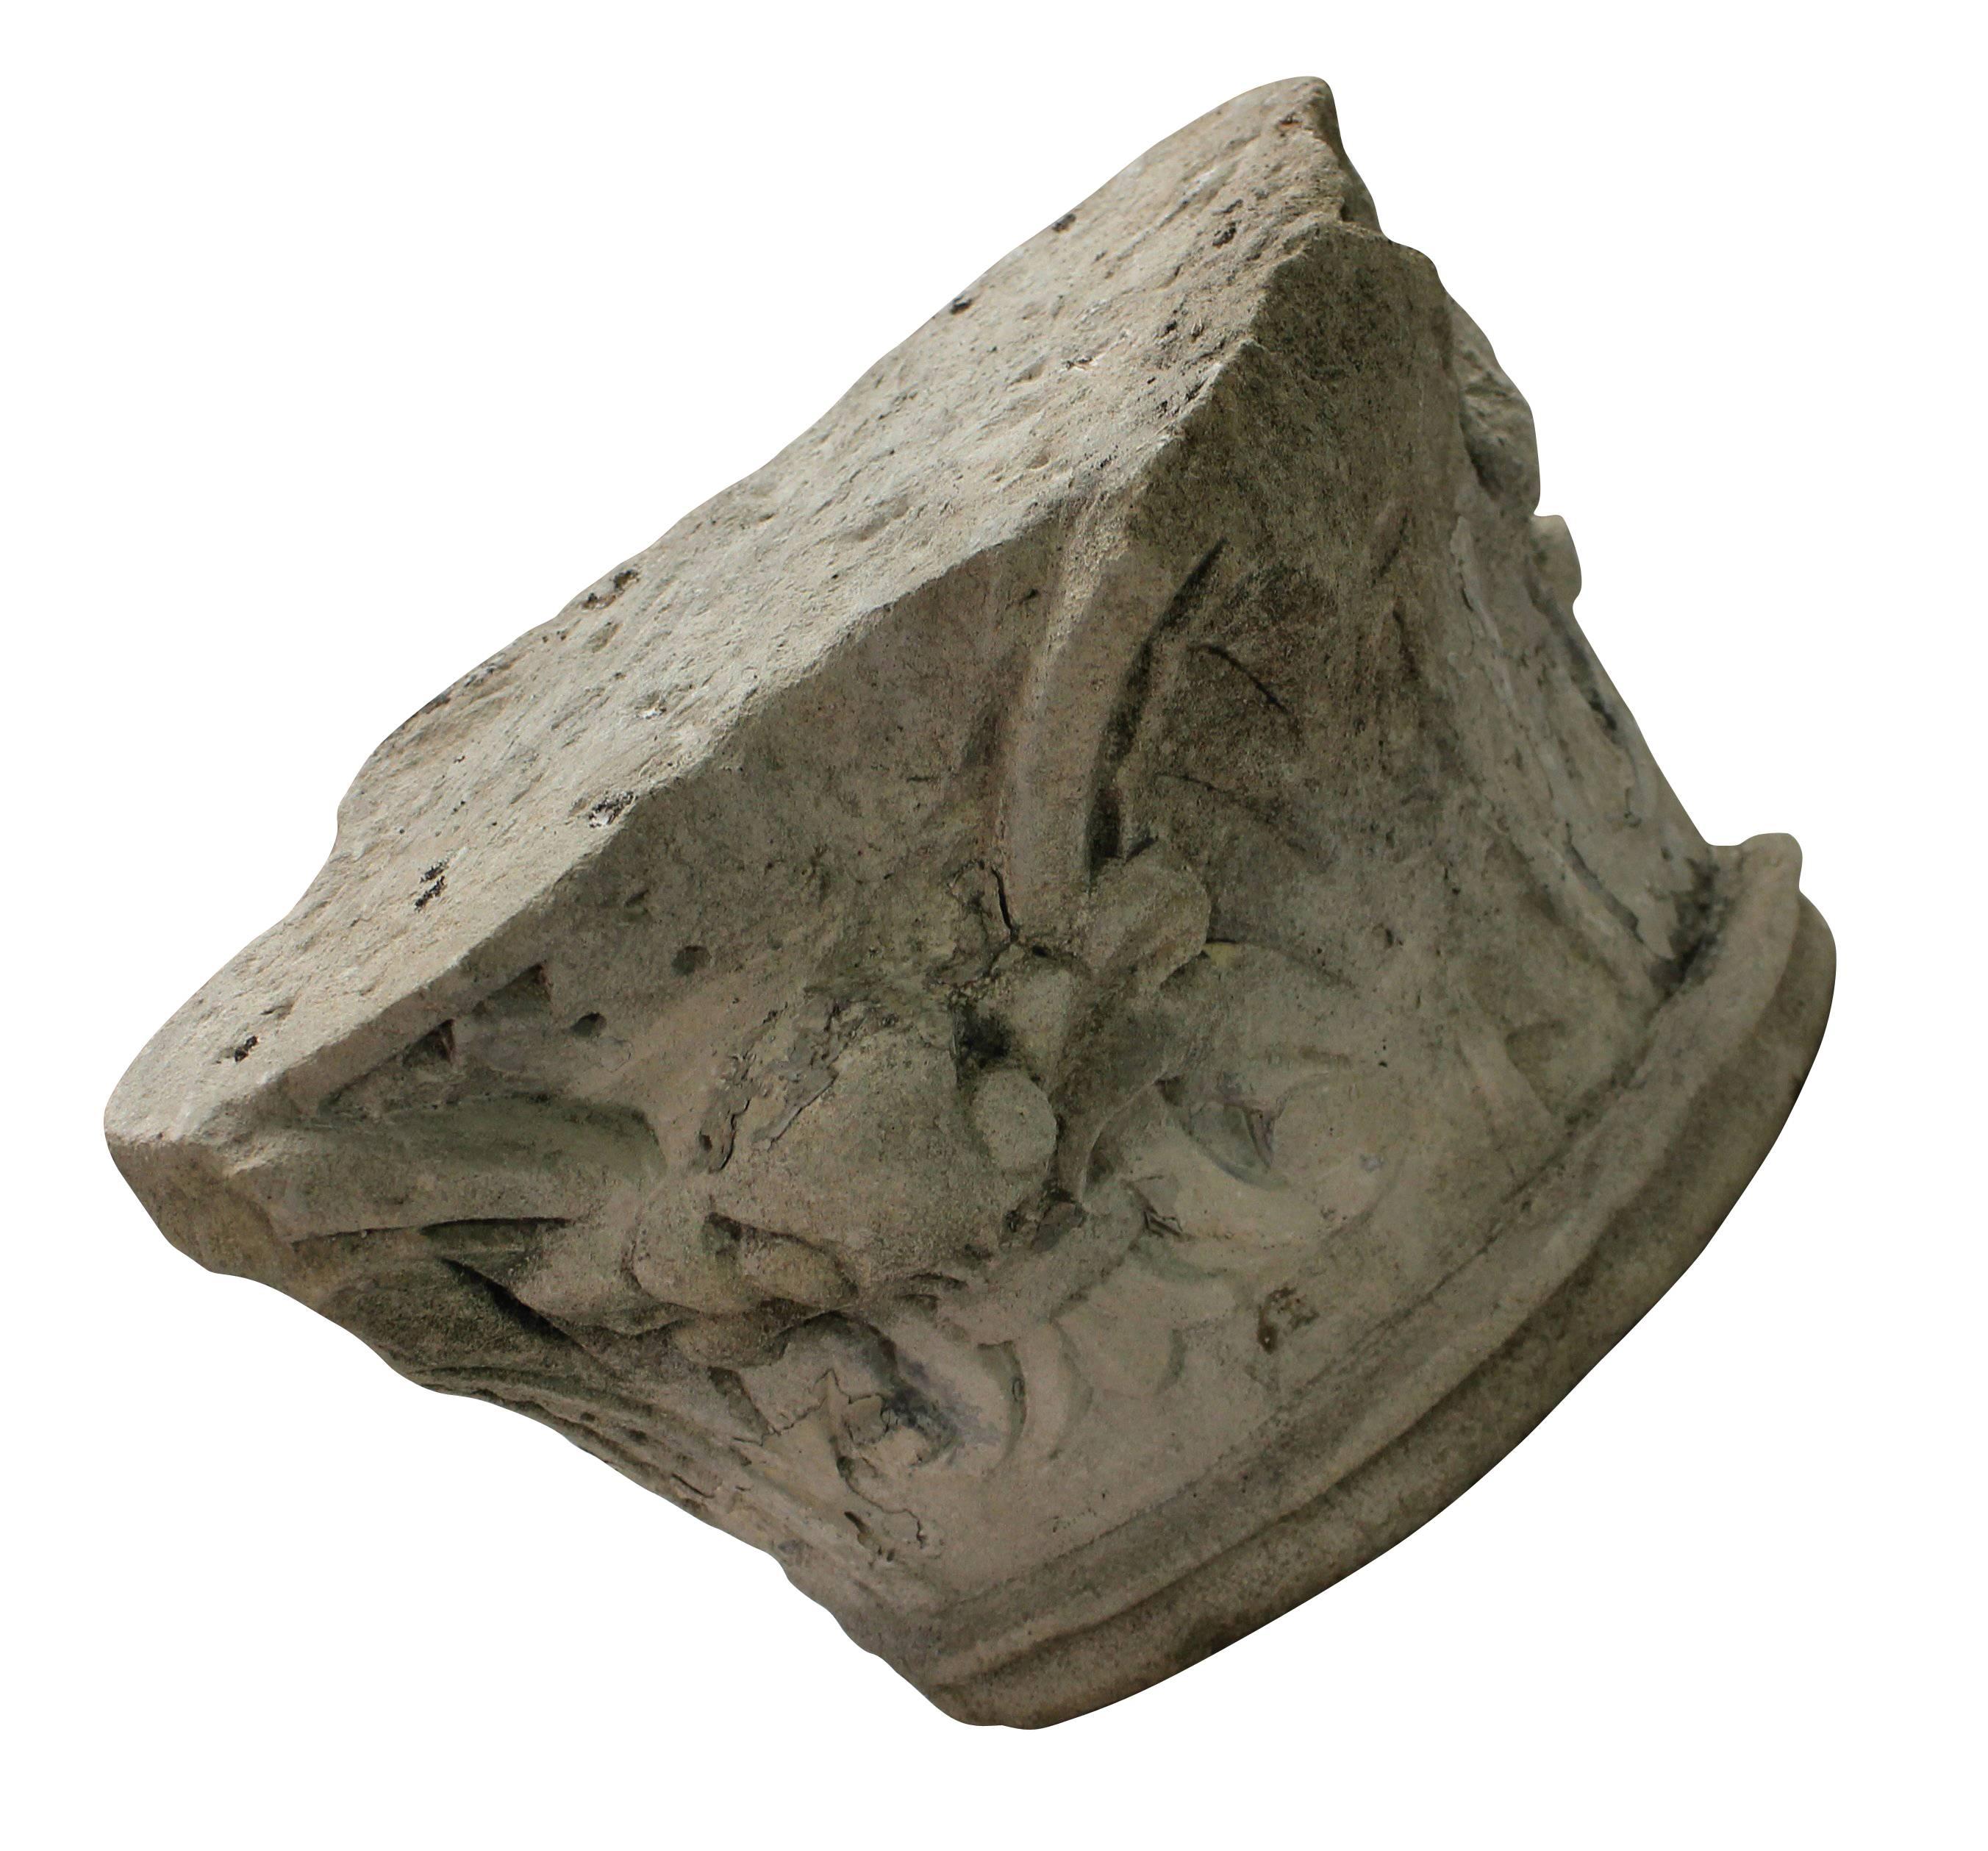 English Pair of Early 18th Century Architectural Stone Fragments